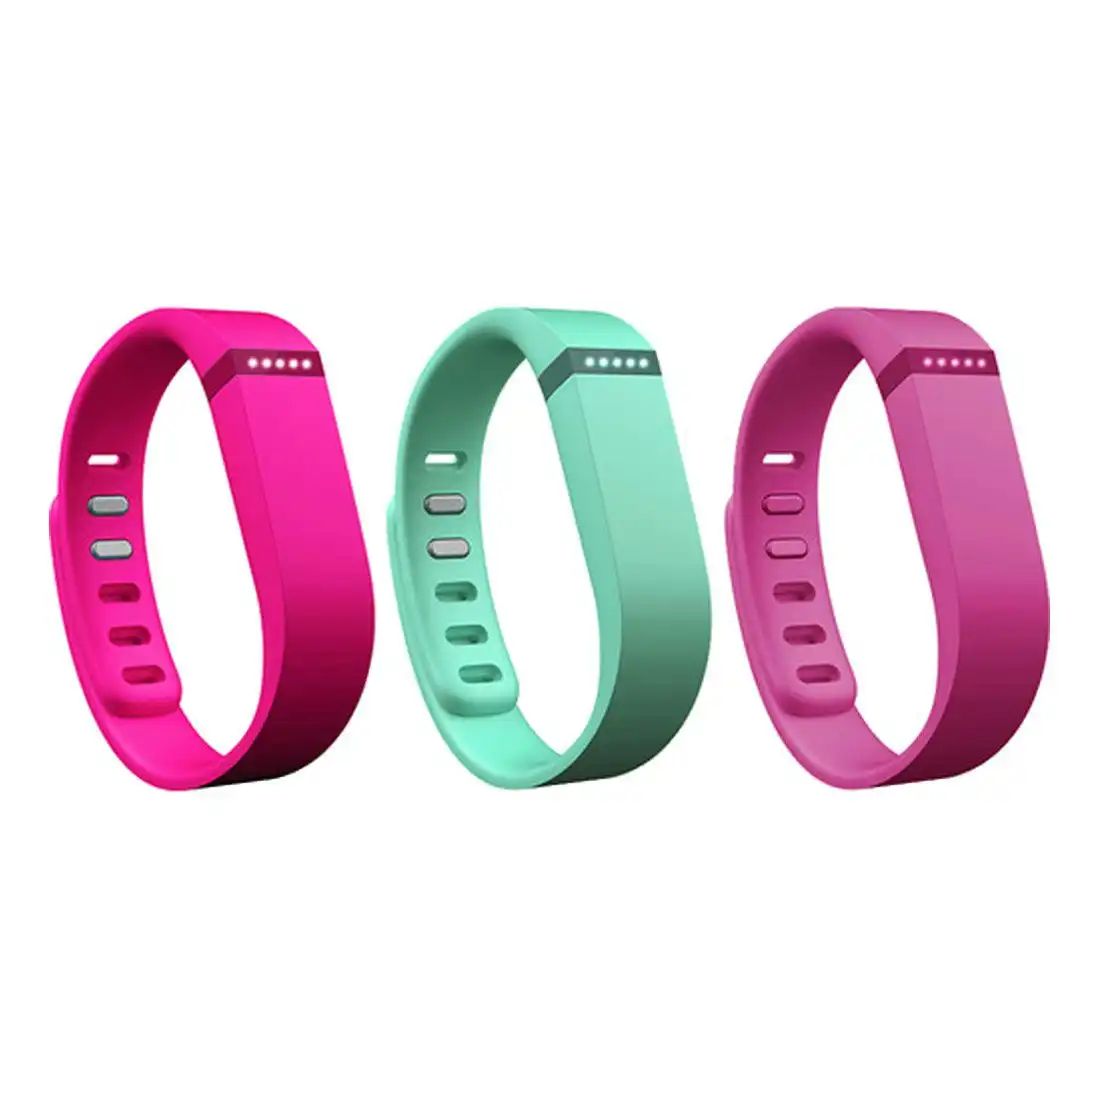 Fitbit Flex Band 3 Pack Vibrant Small FB401BVTPS - Violet, Teal and Pink